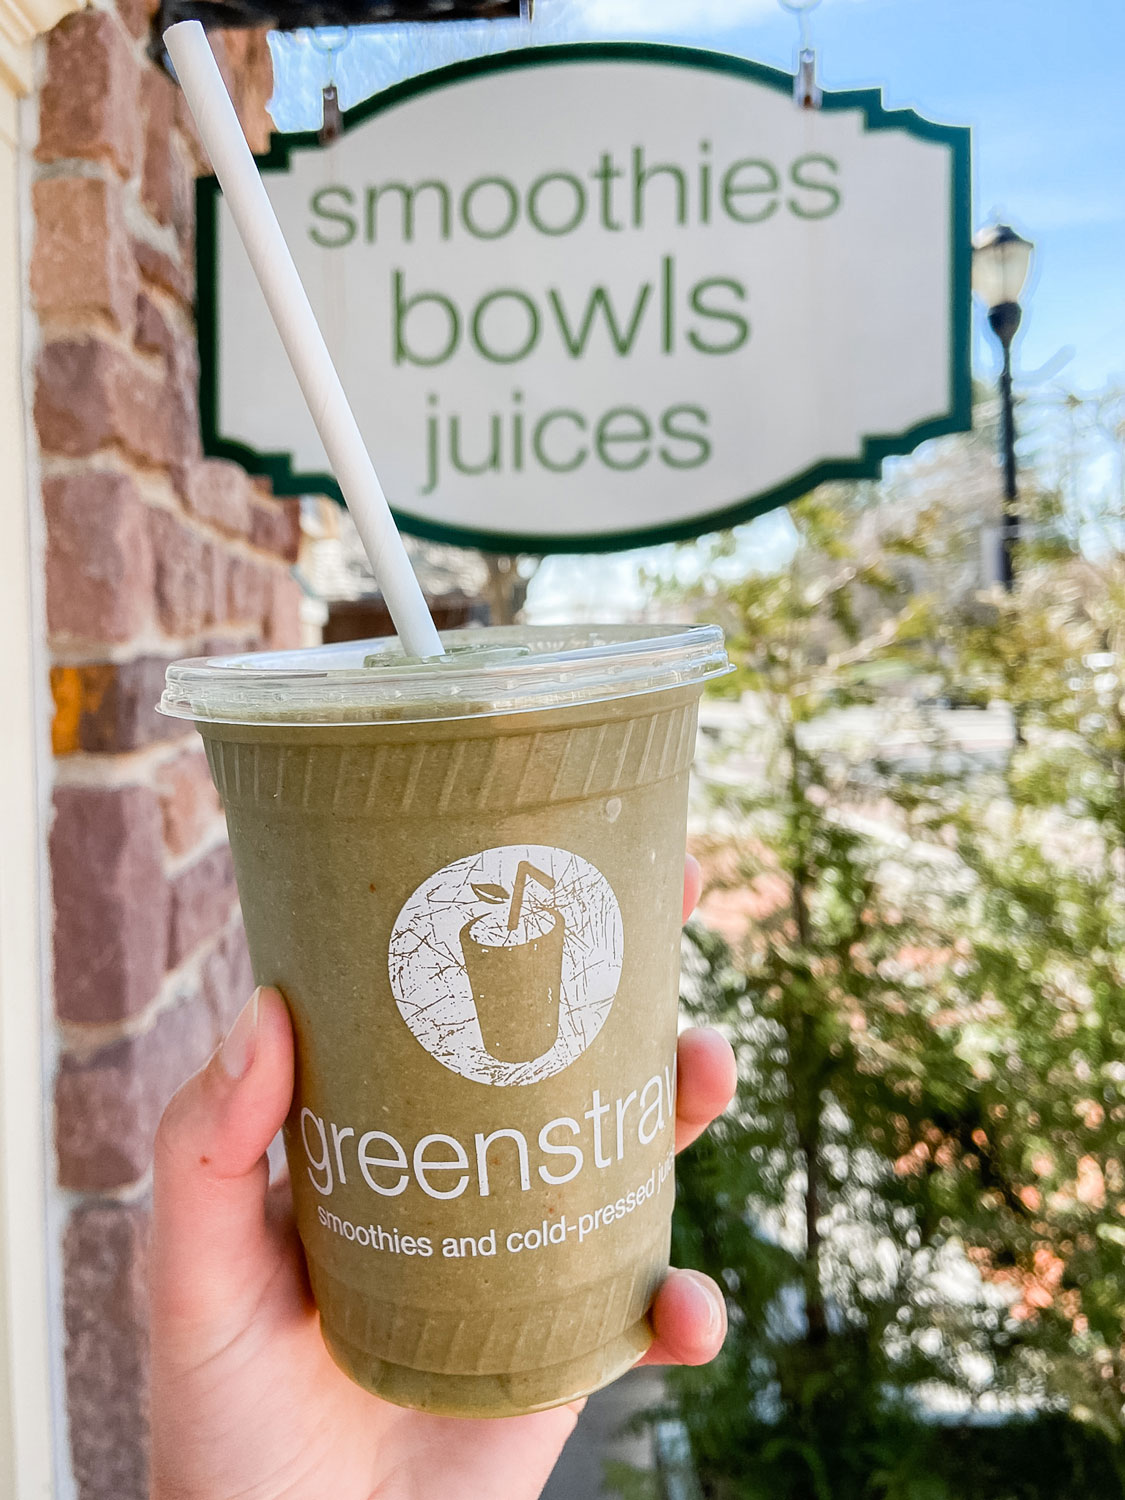 A green smoothie from Greenstraw.